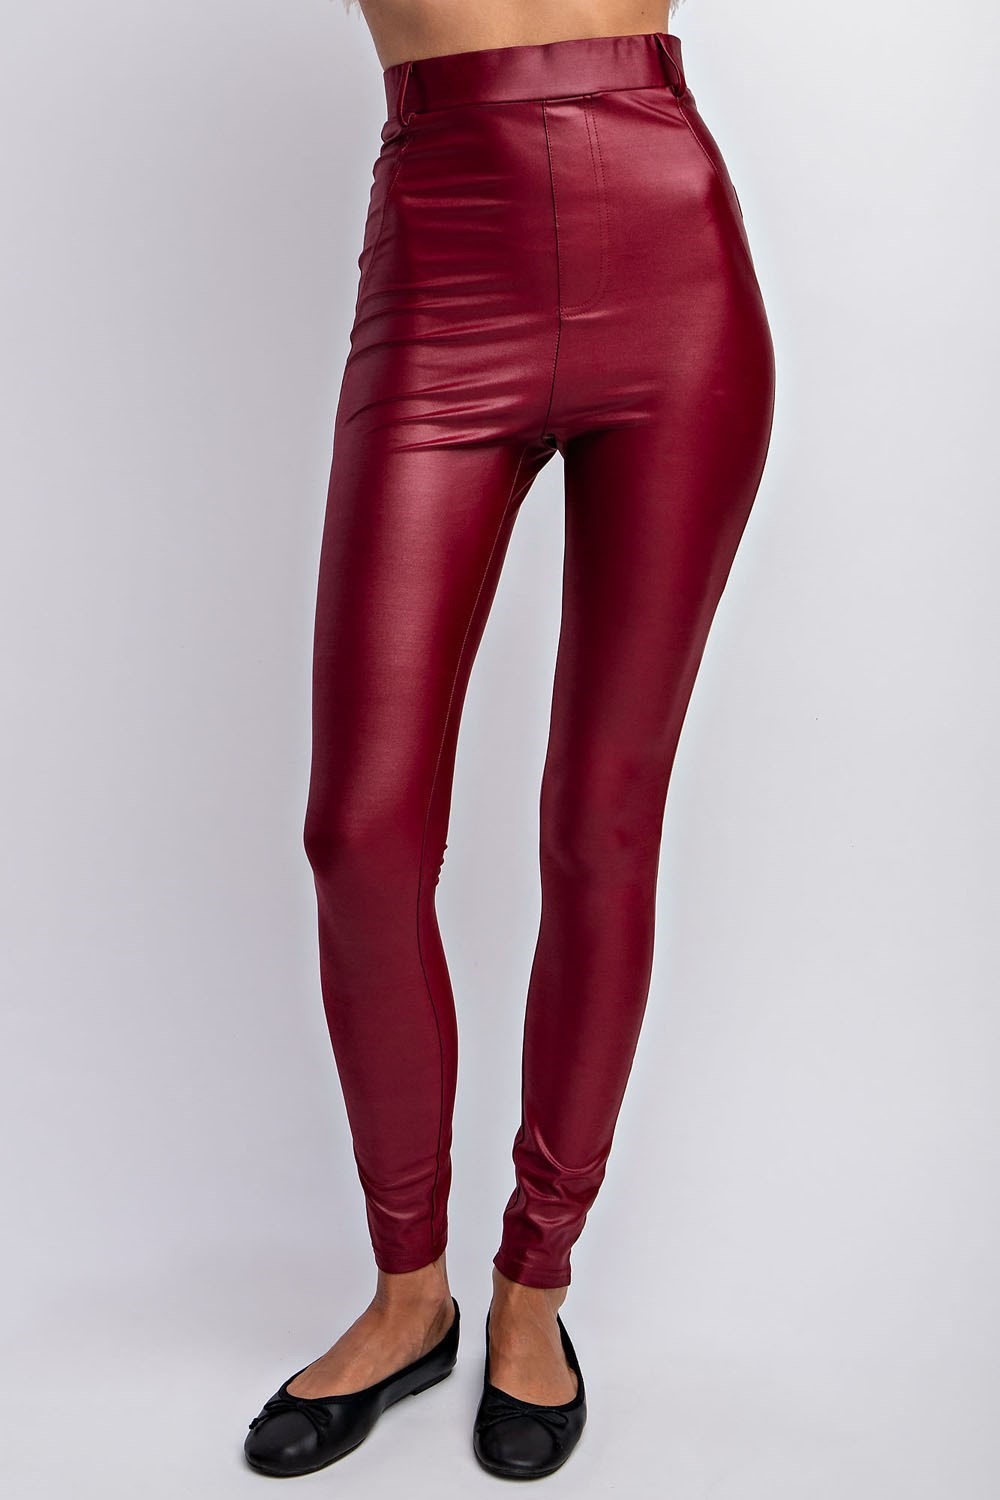 Solid Stretch Faux Leather Pants